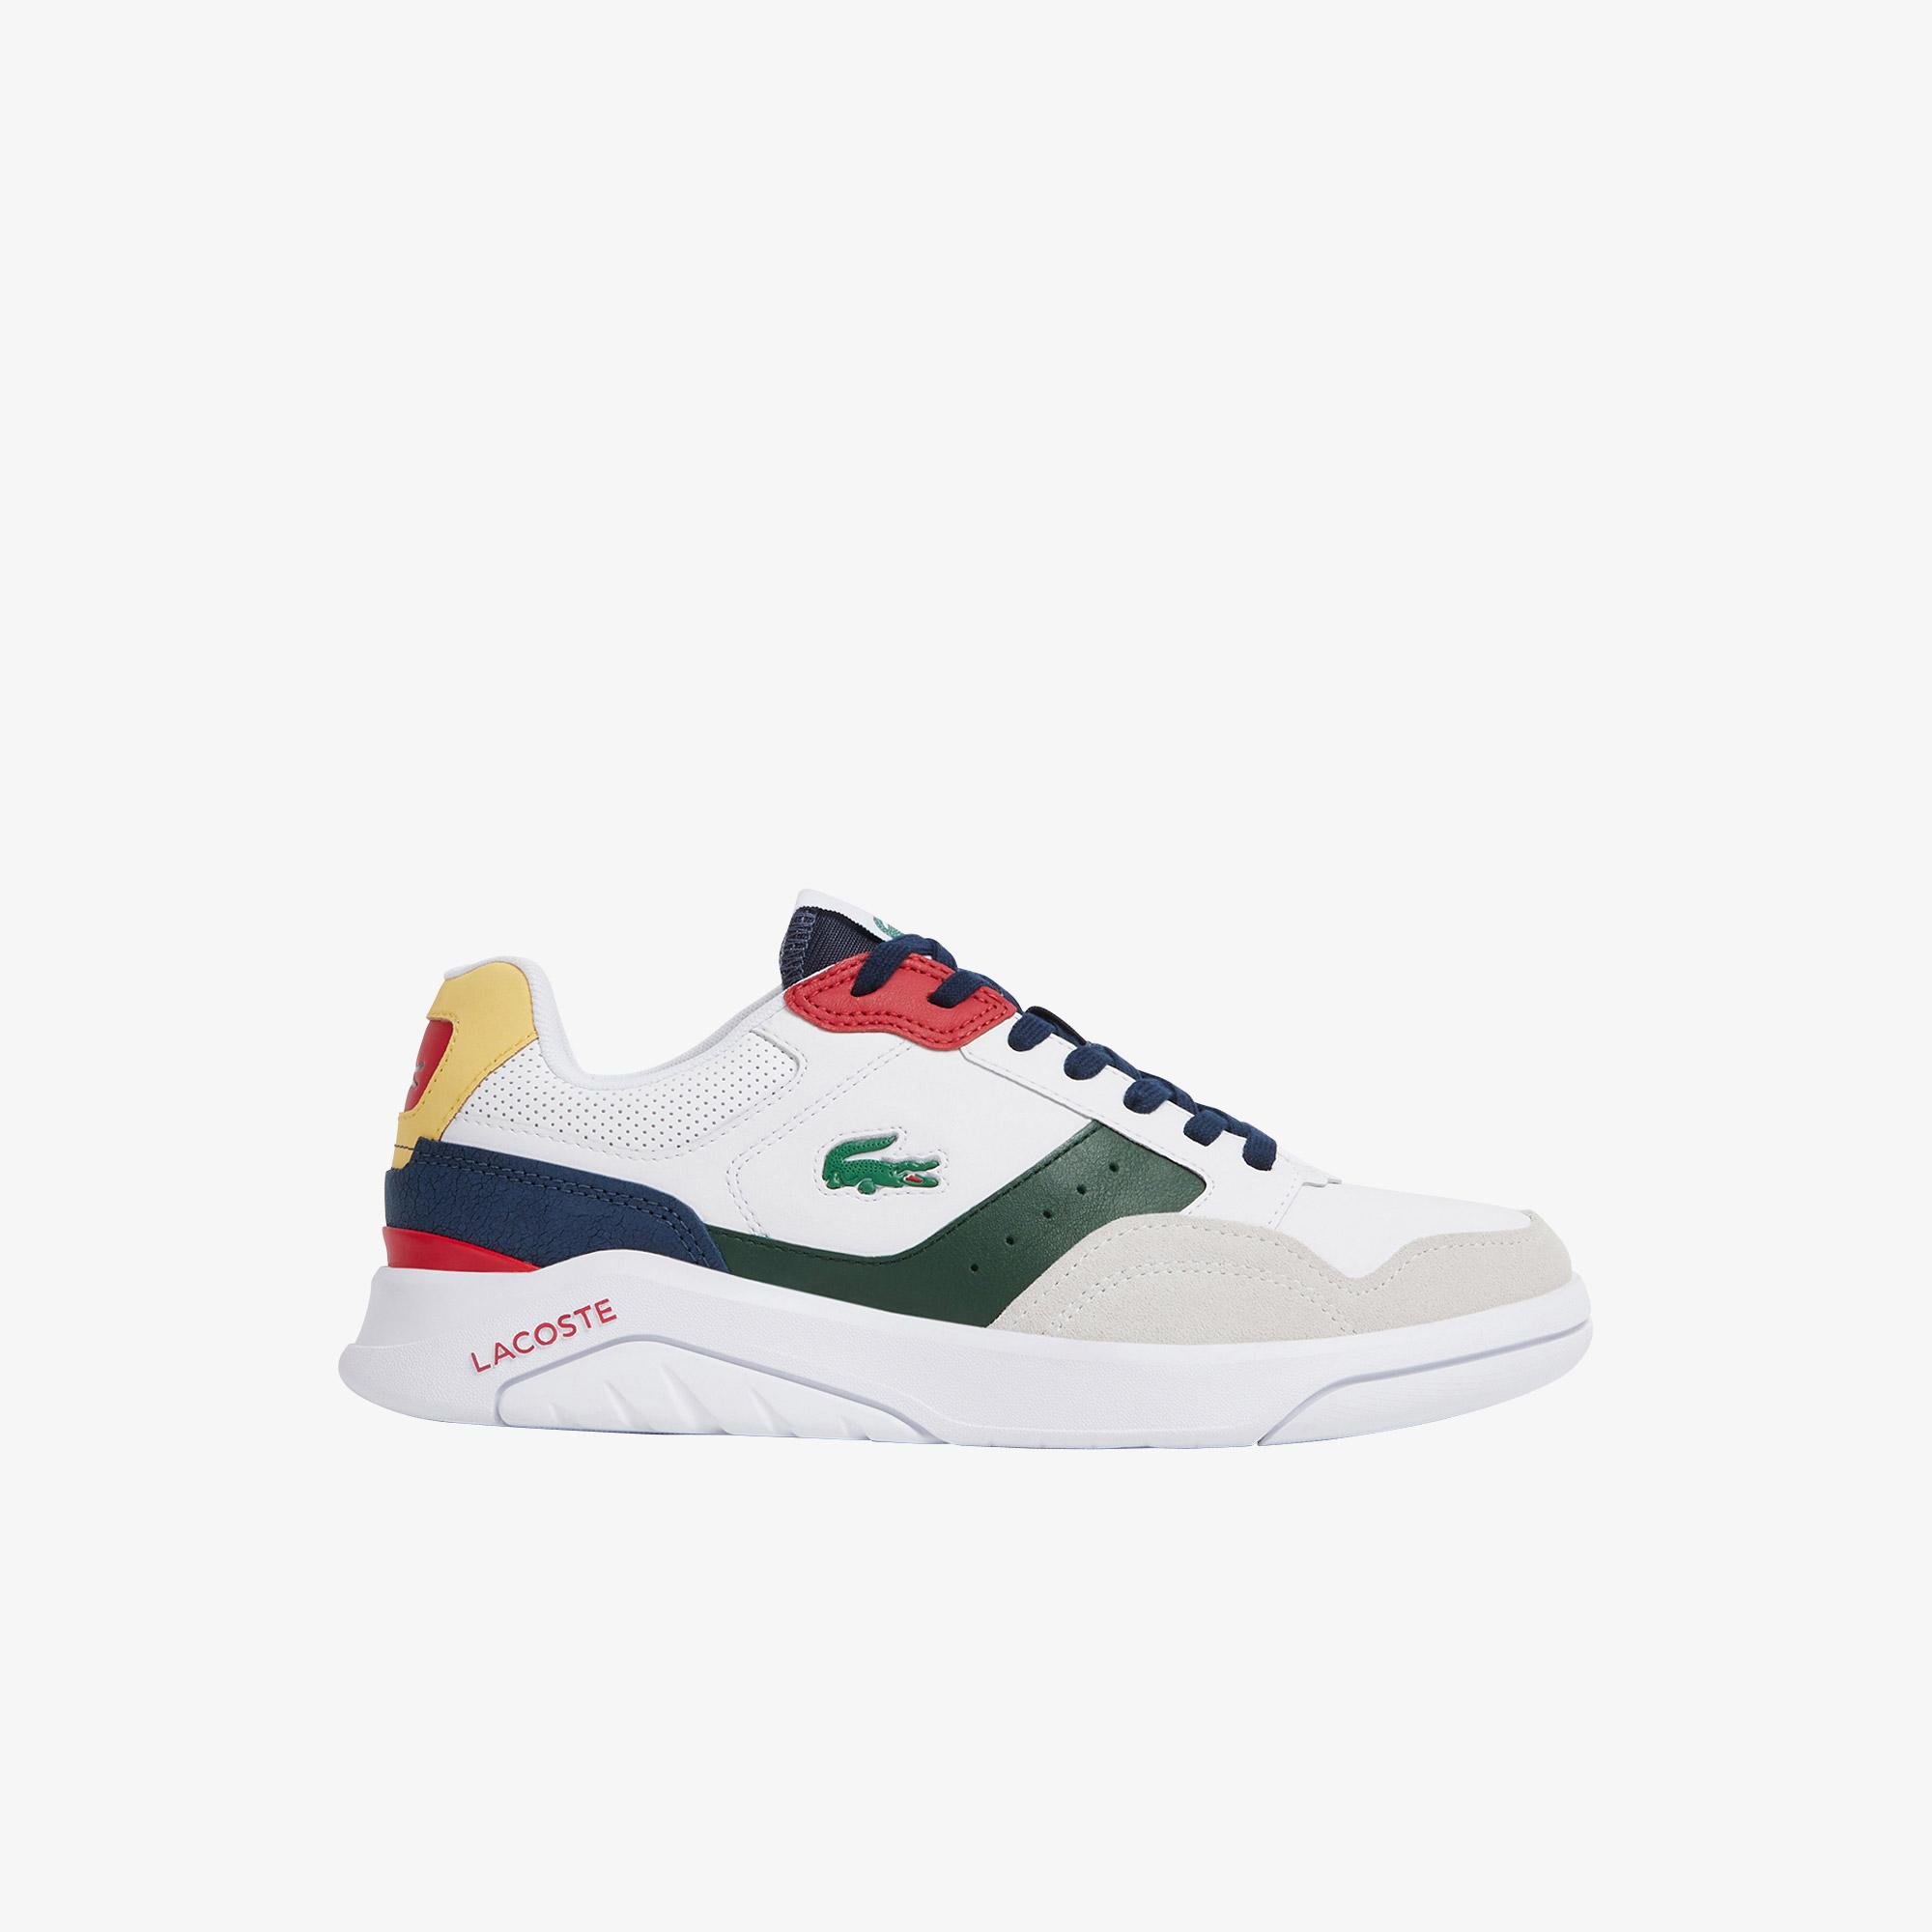 Lacoste Men's Game Advance Luxe Sneakers